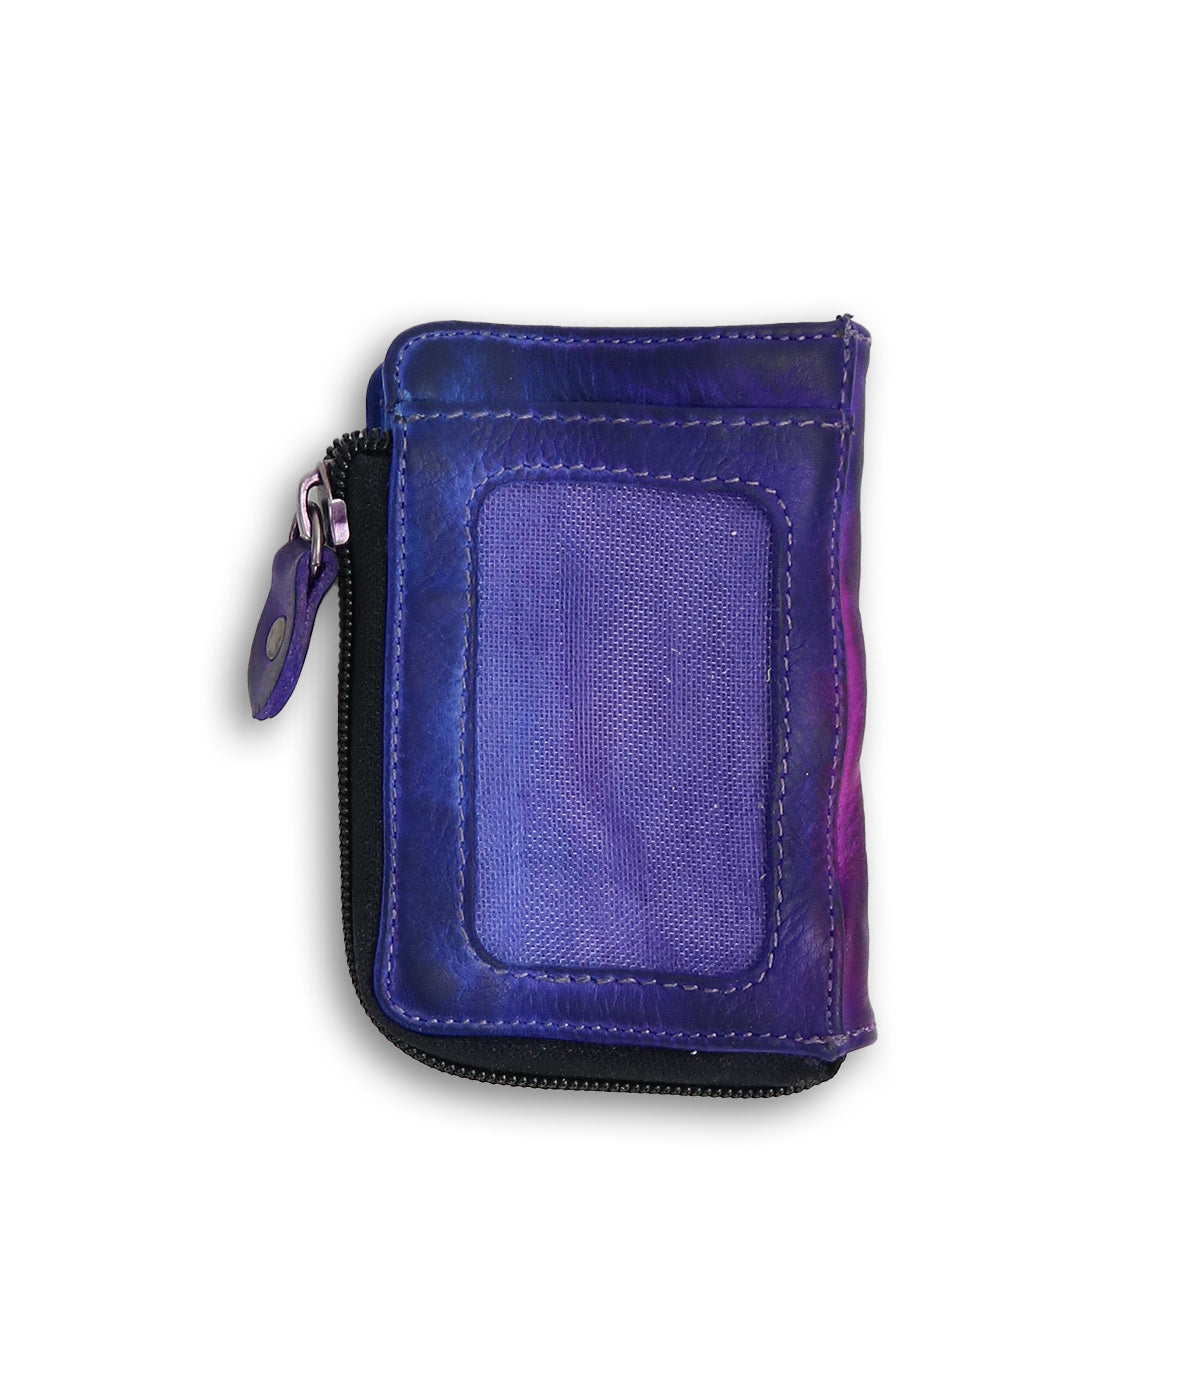 A purple and blue Carrie wallet by Bed Stu on a white surface.